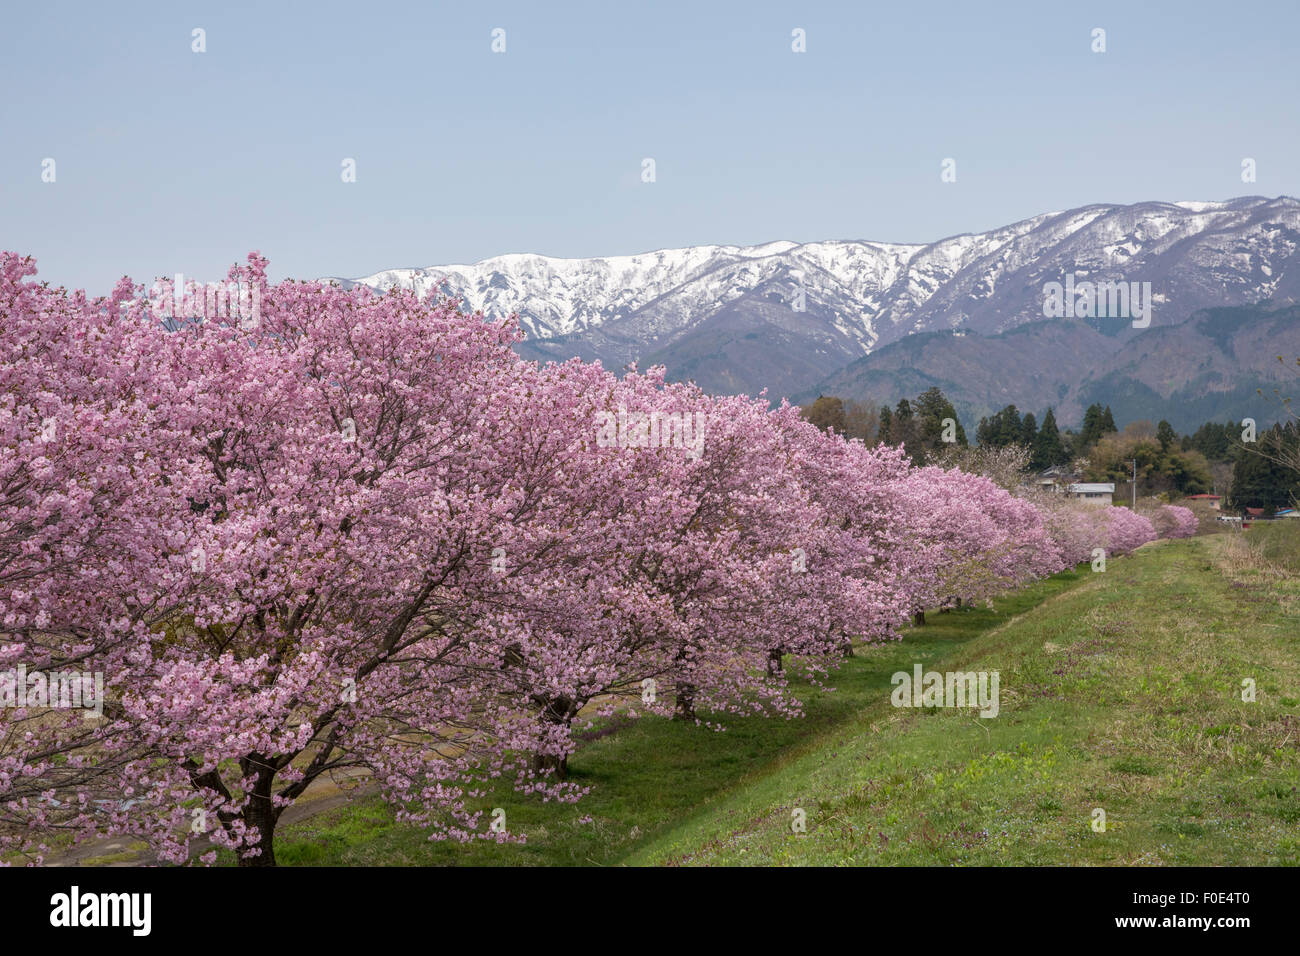 Cherry trees and snow covered mountains in Japan Stock Photo